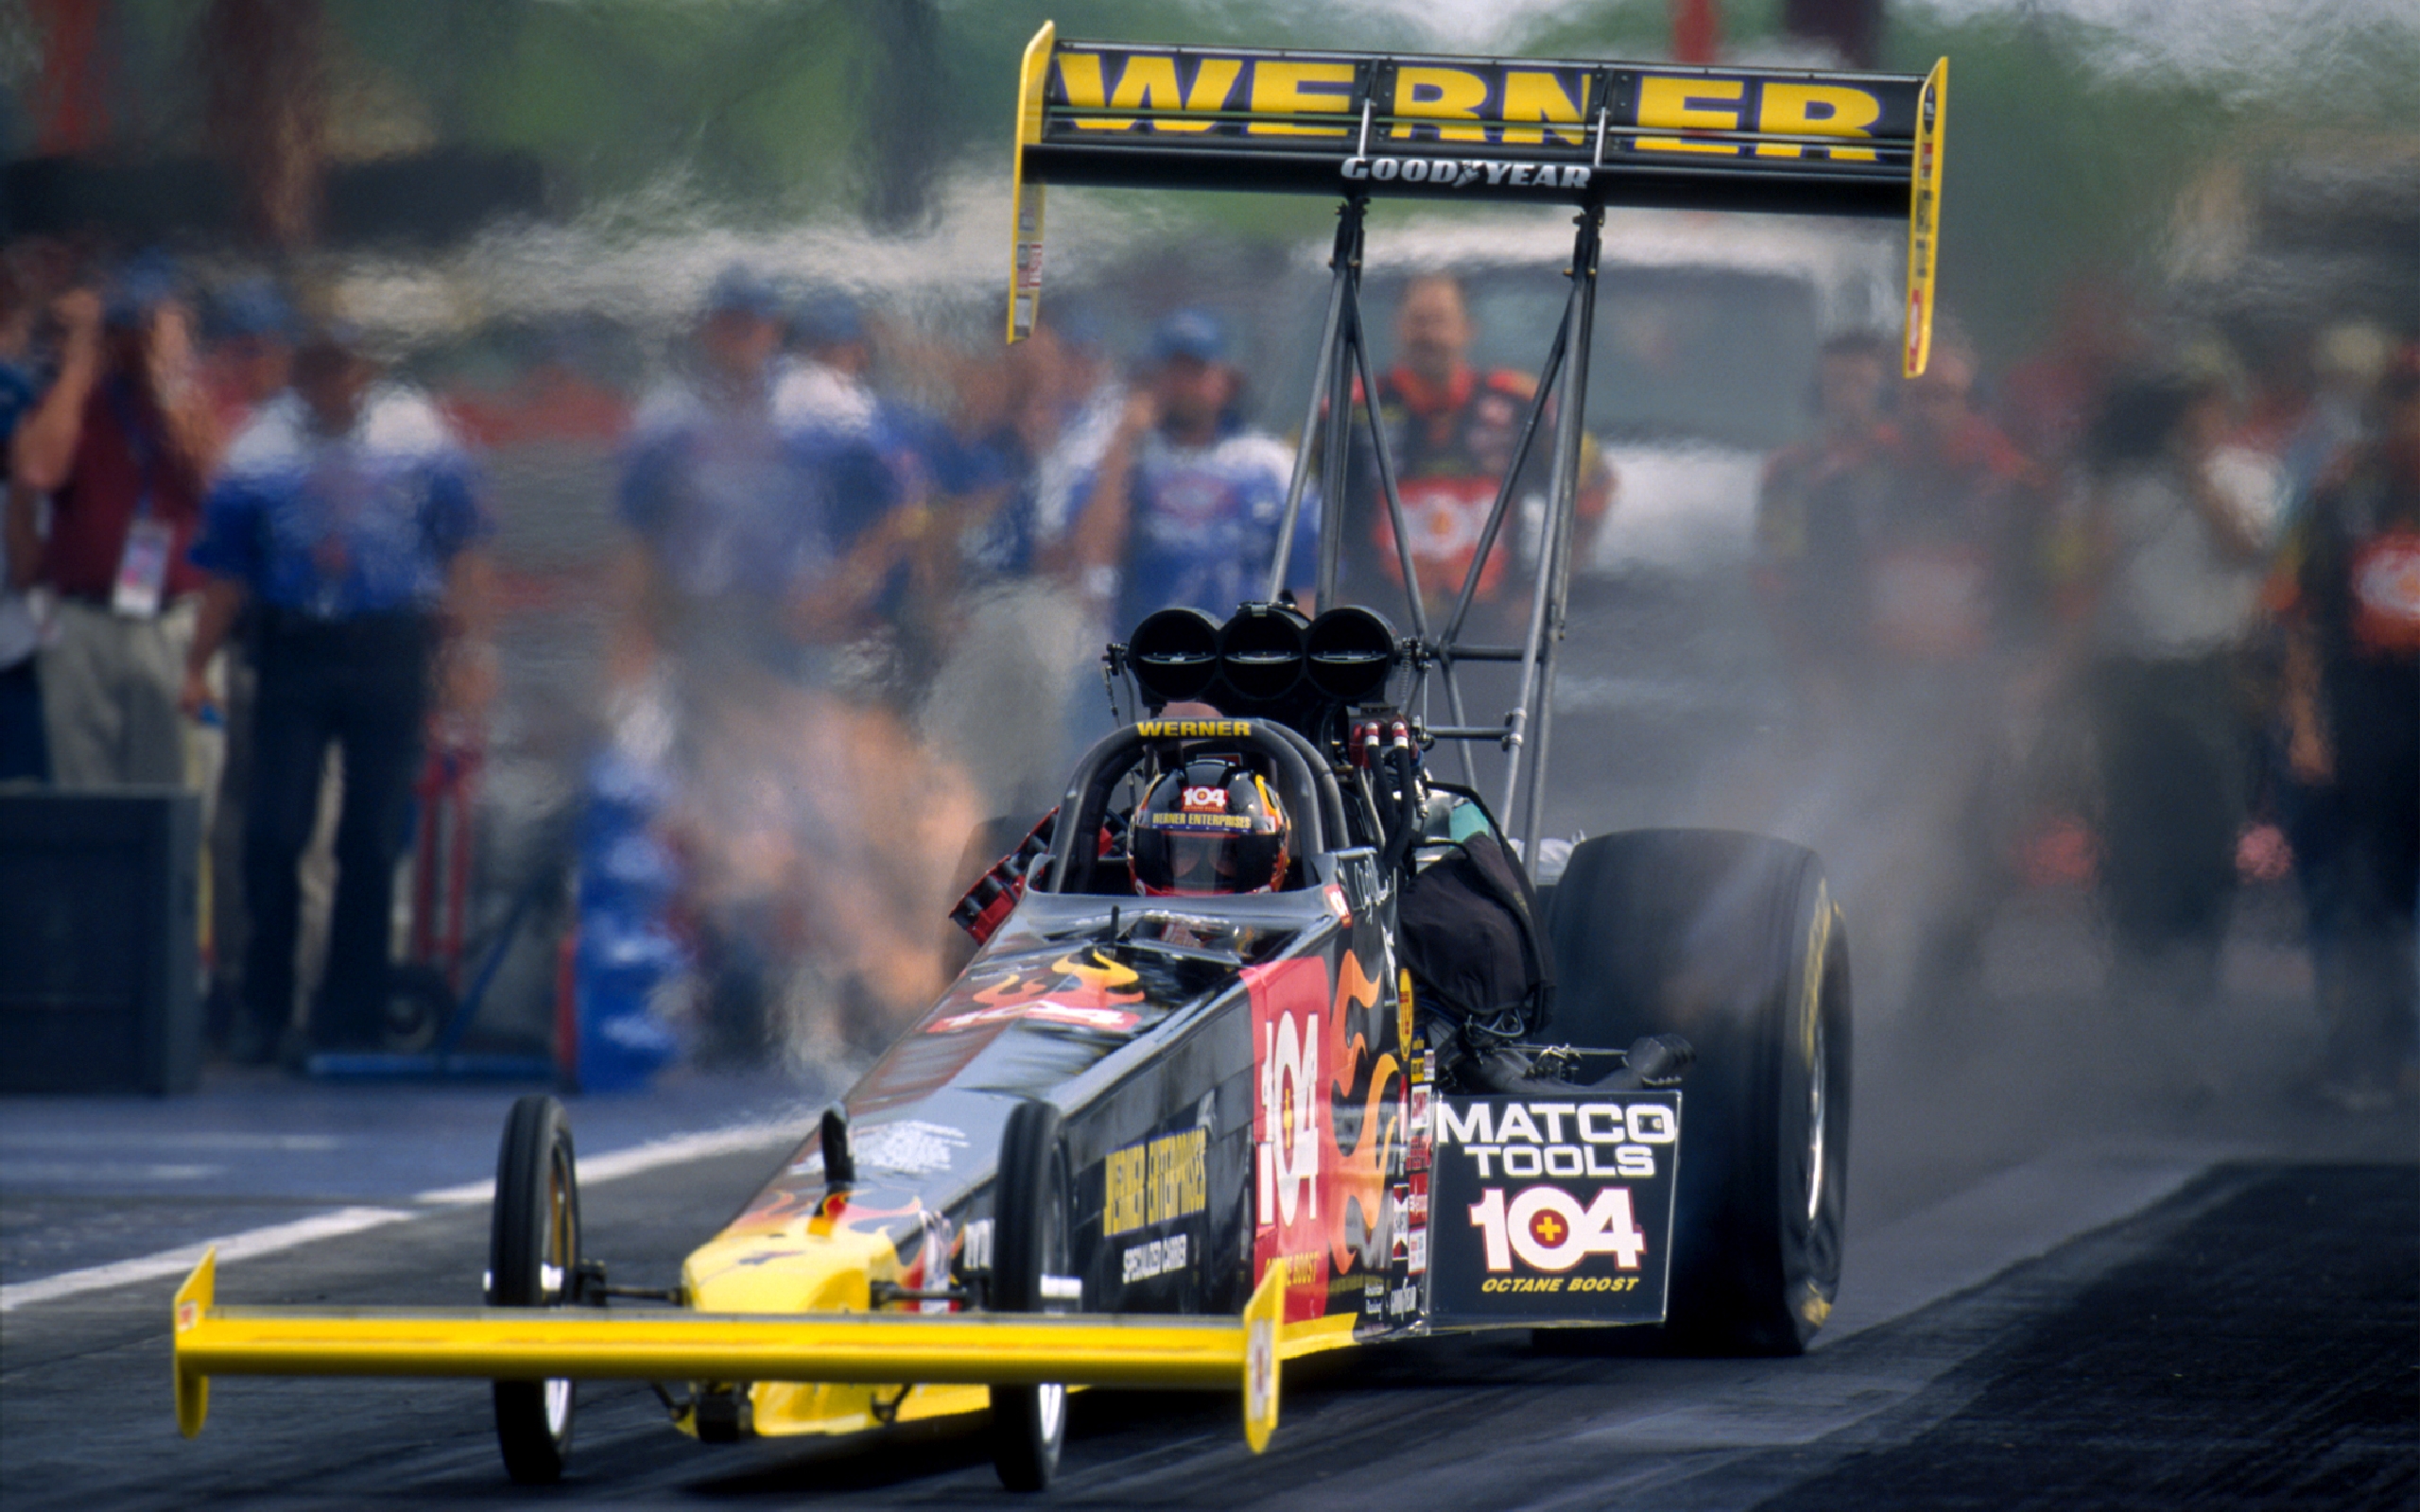 dragster, vehicles, car, race iphone wallpaper